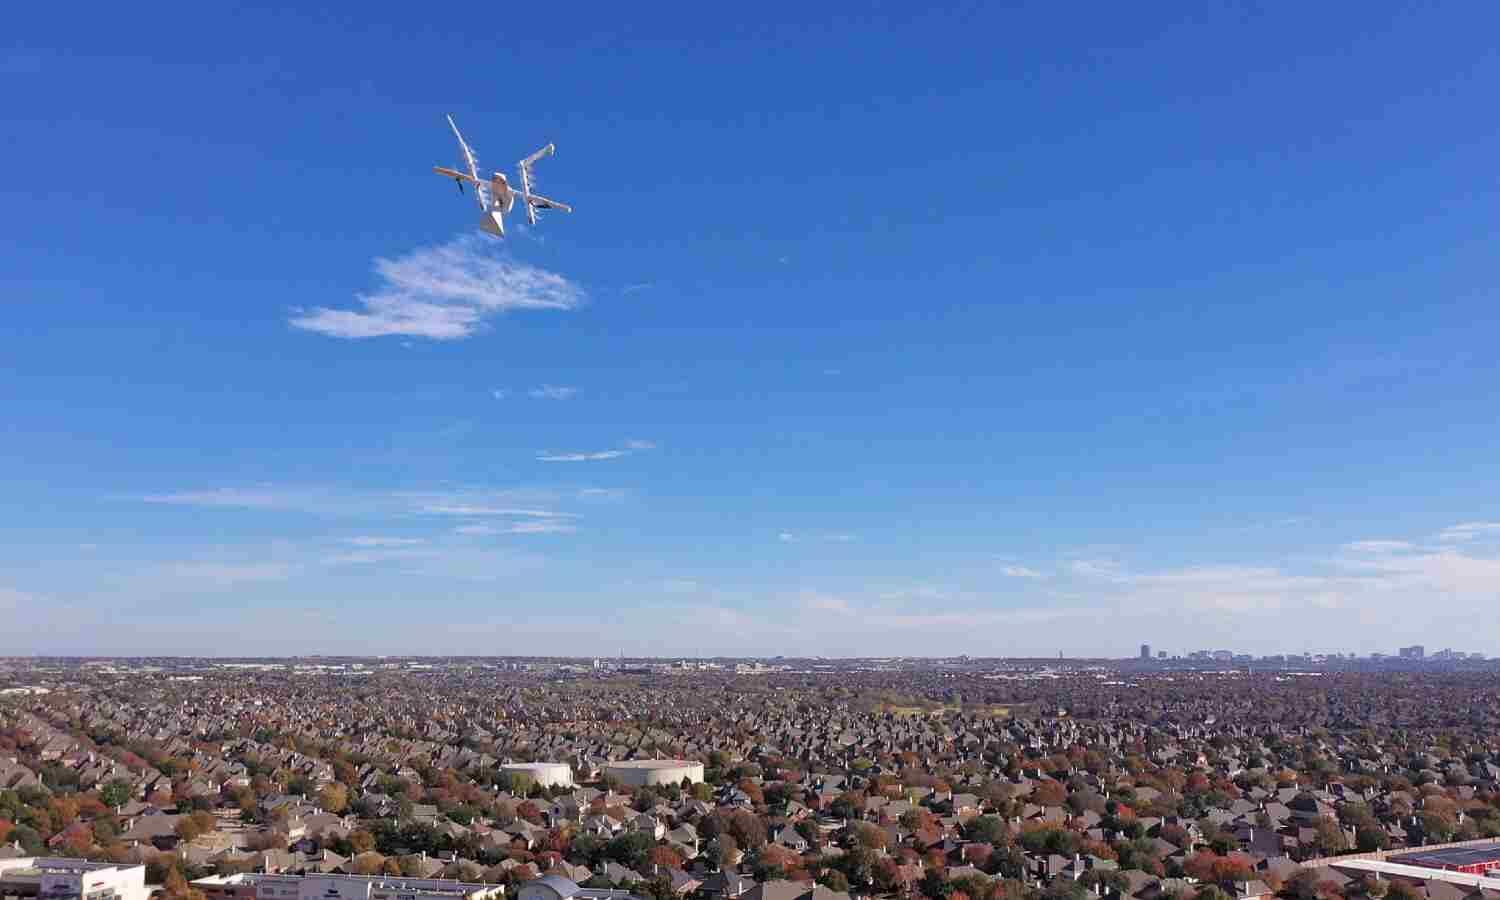 Wing to debut drone delivery service in Texas